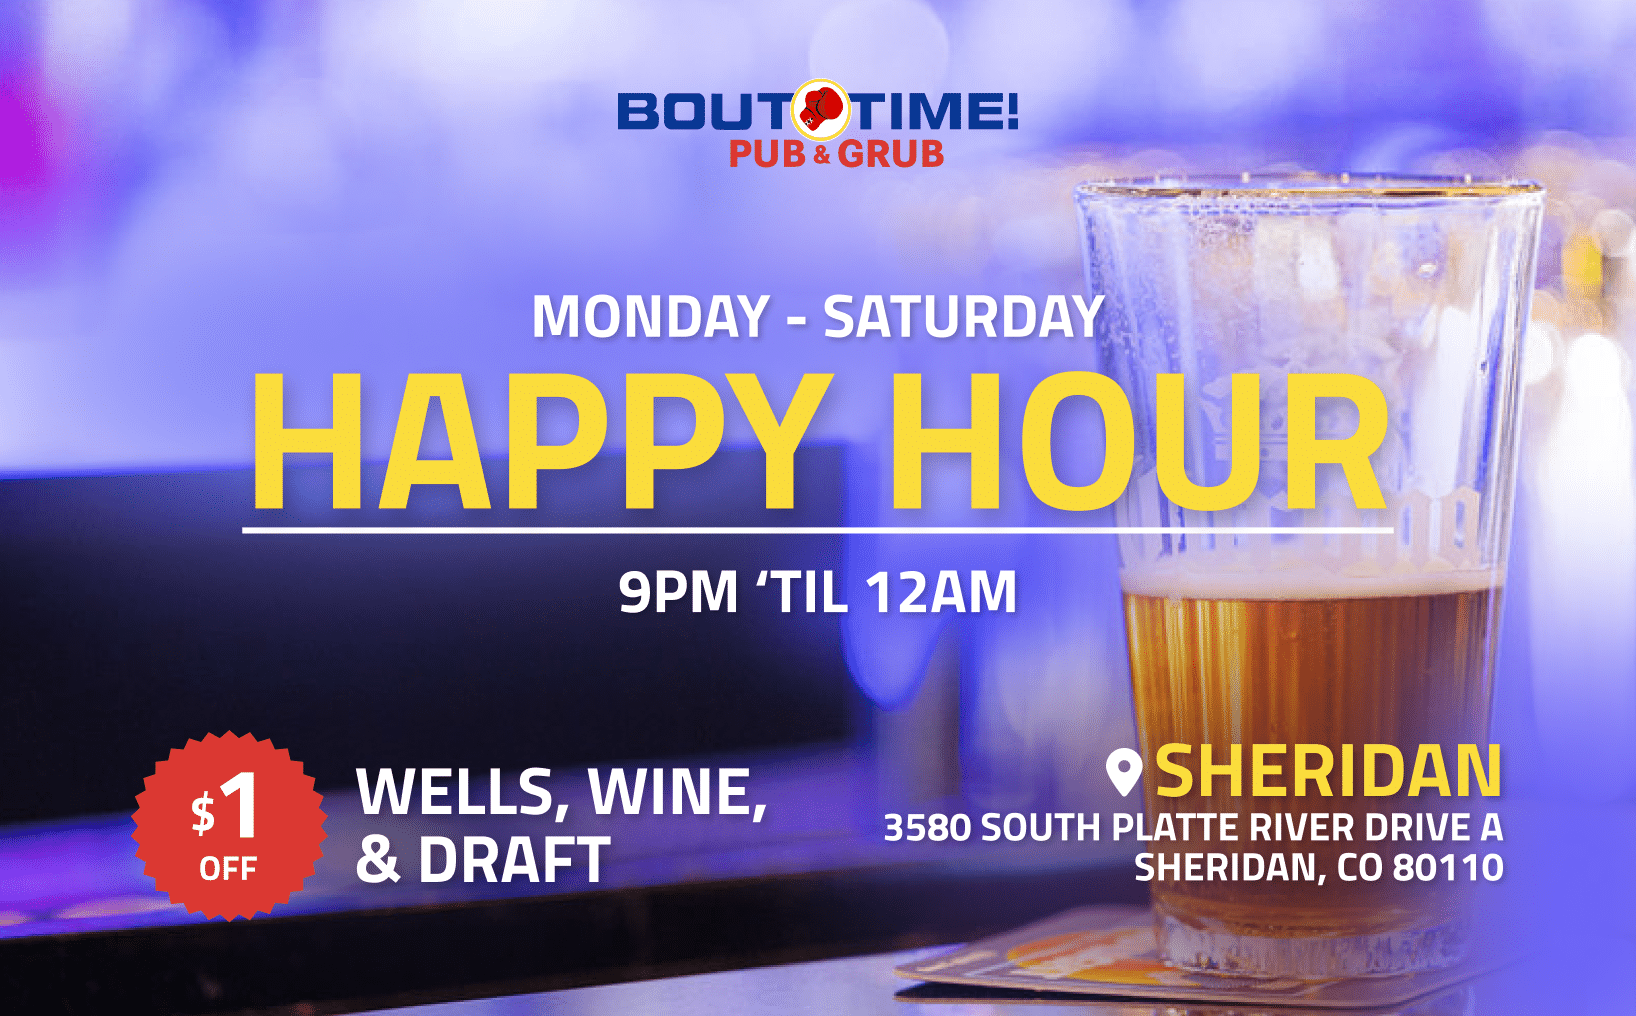 Happy Hour, Monday-Saturday, 9pm to 12am, at Sheridan Colorado location of Bout Time Pub & Grill